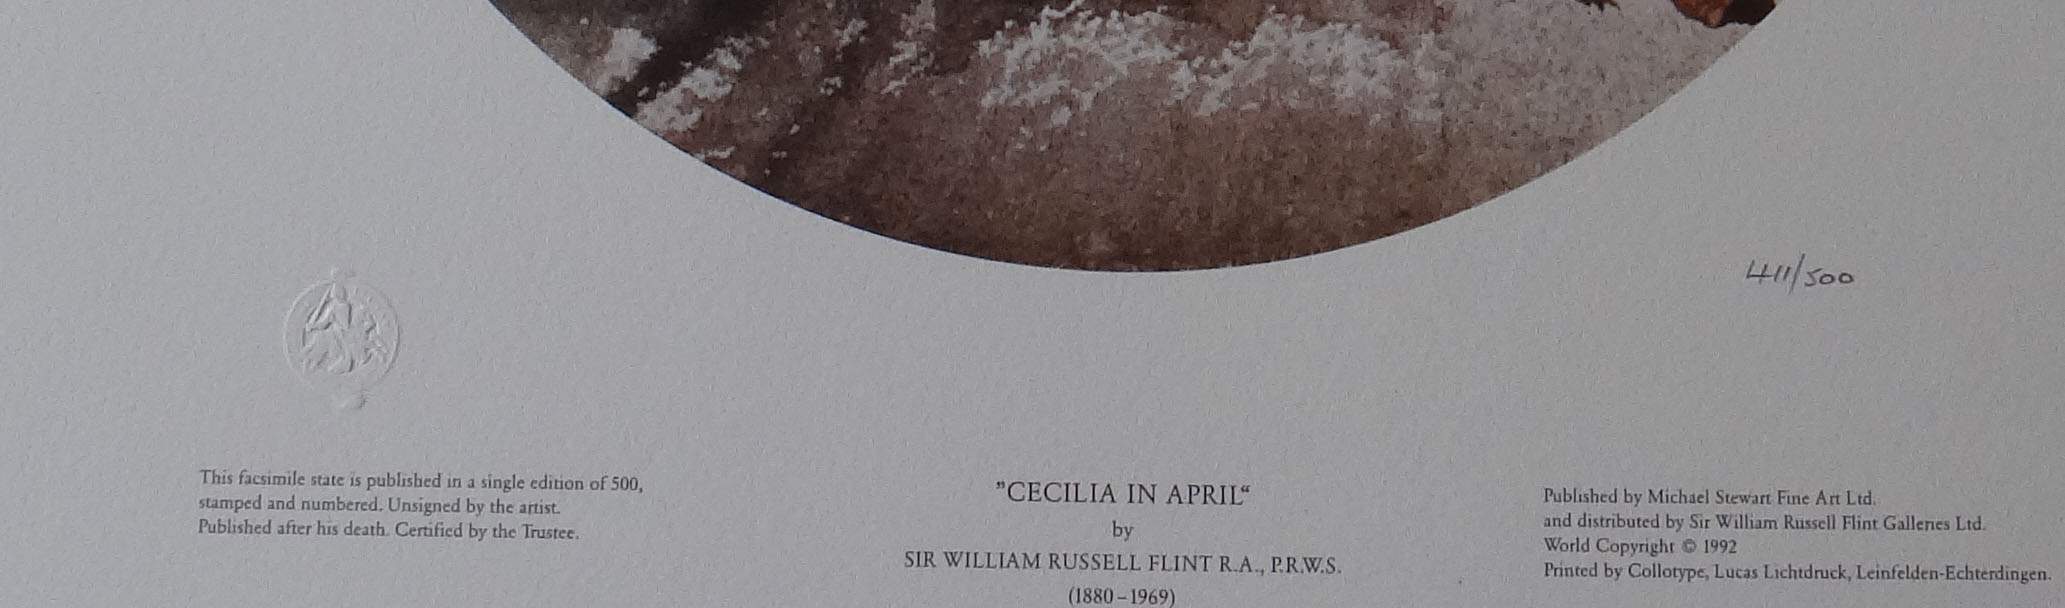 russell flint cecilia in april print, details